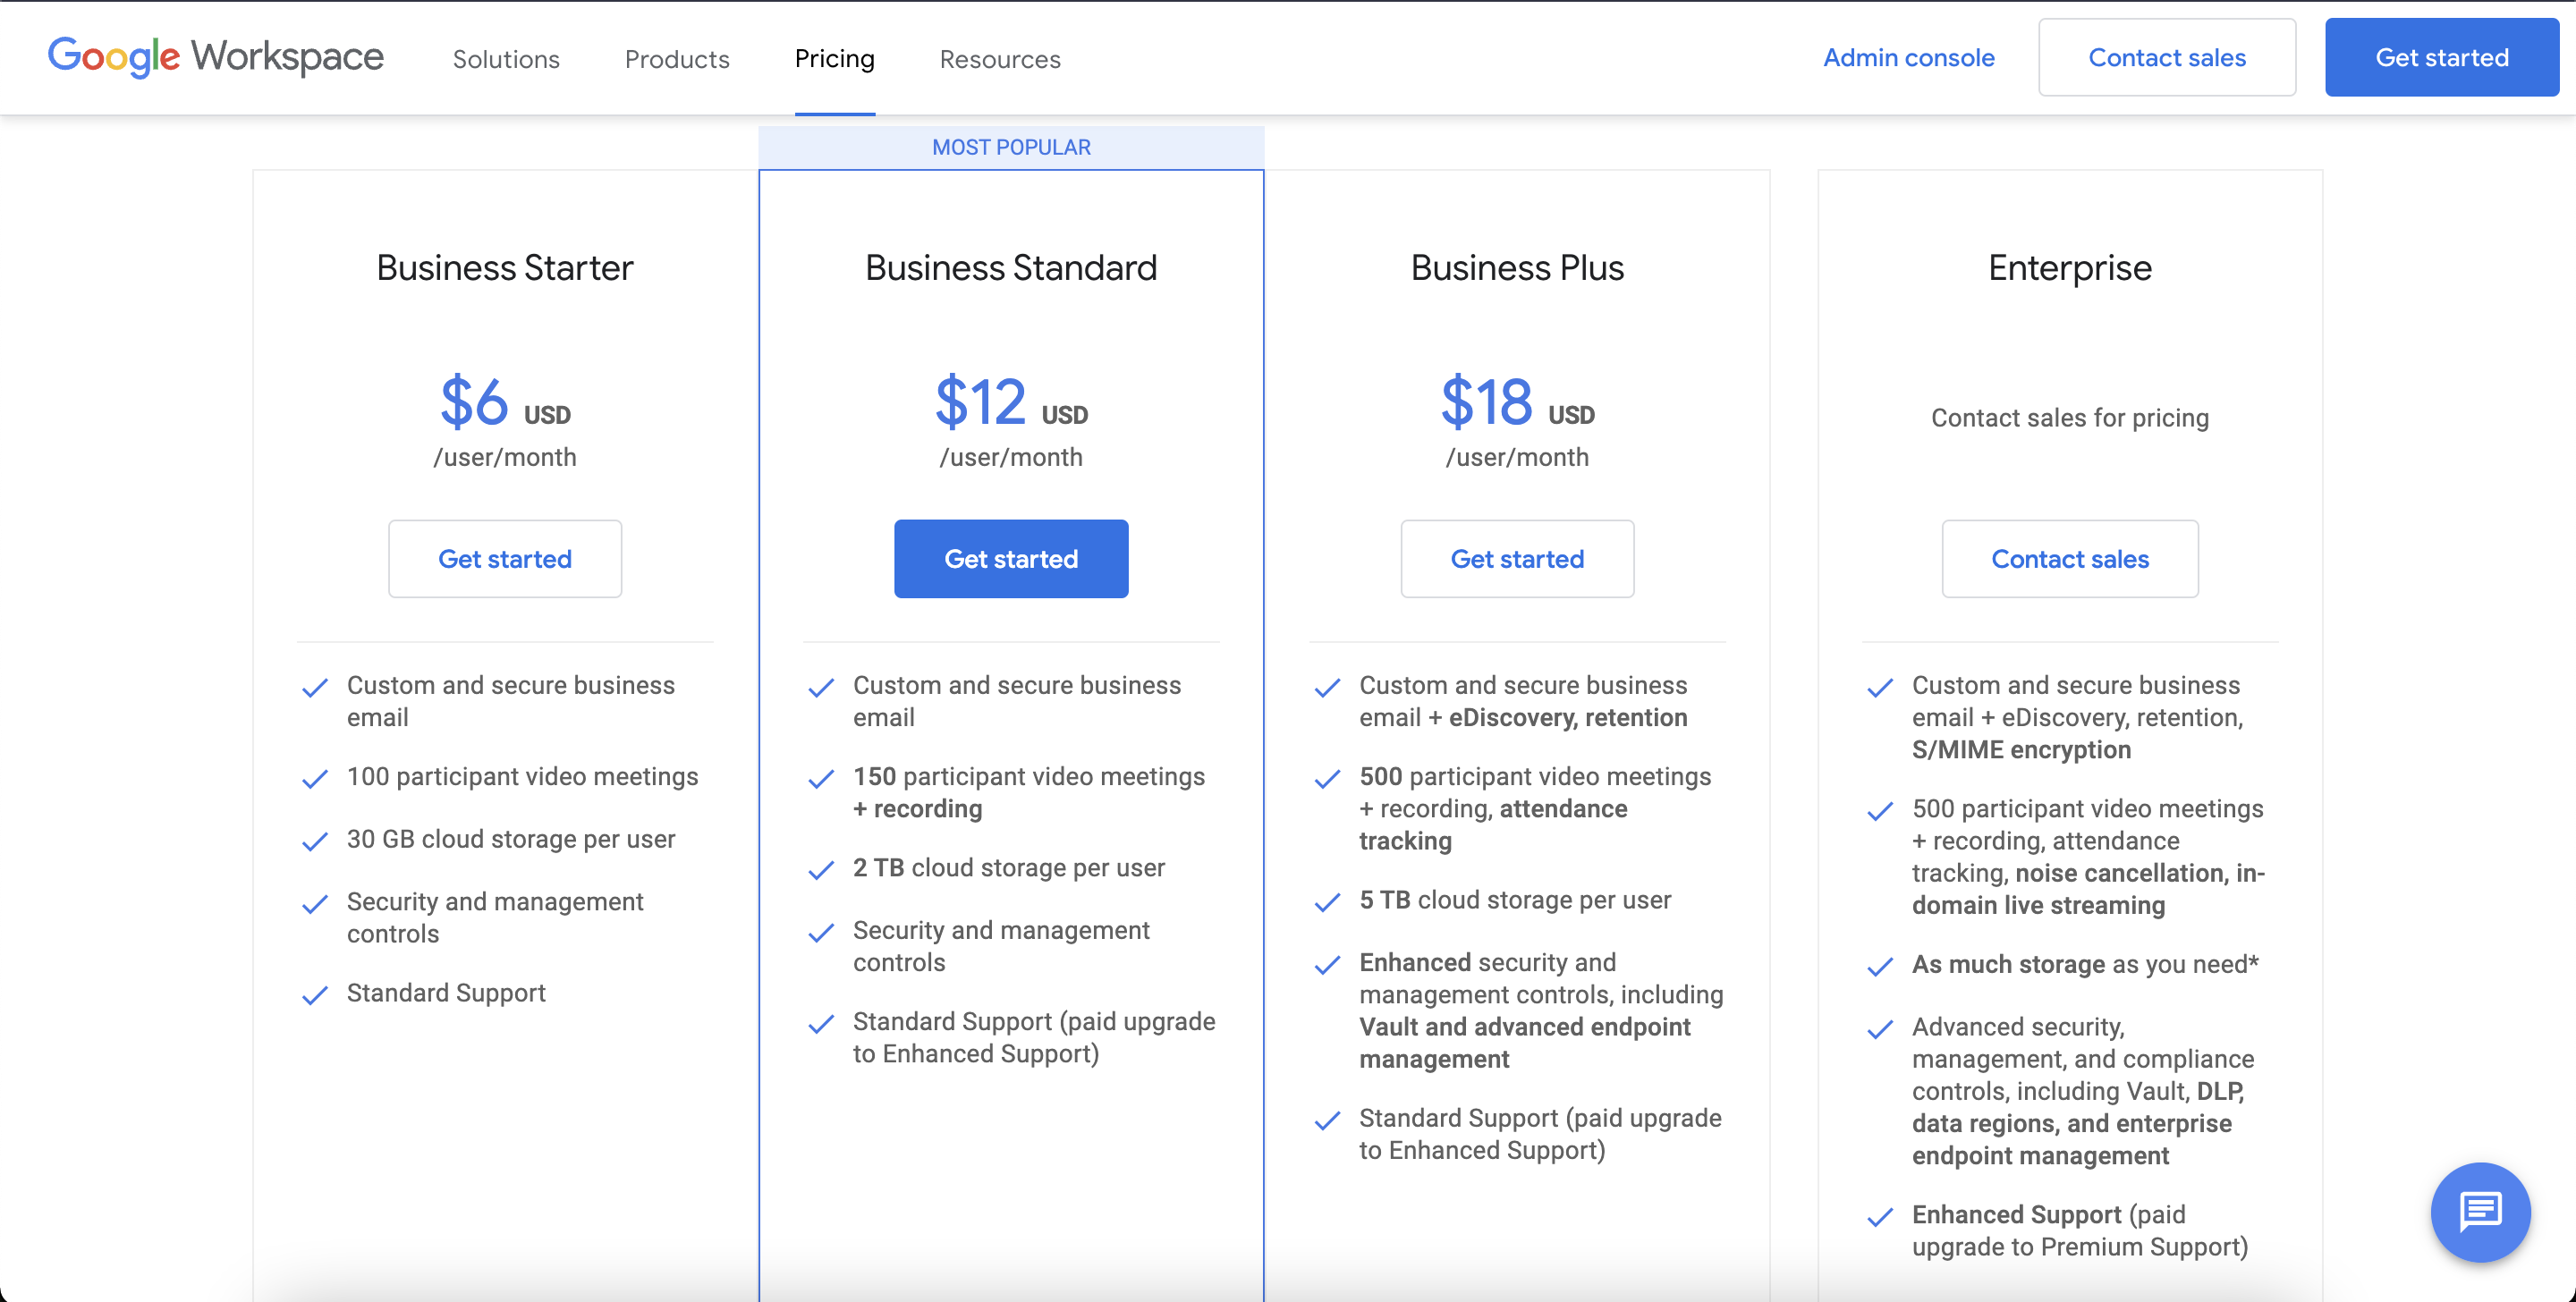 google workspace pricing in the US